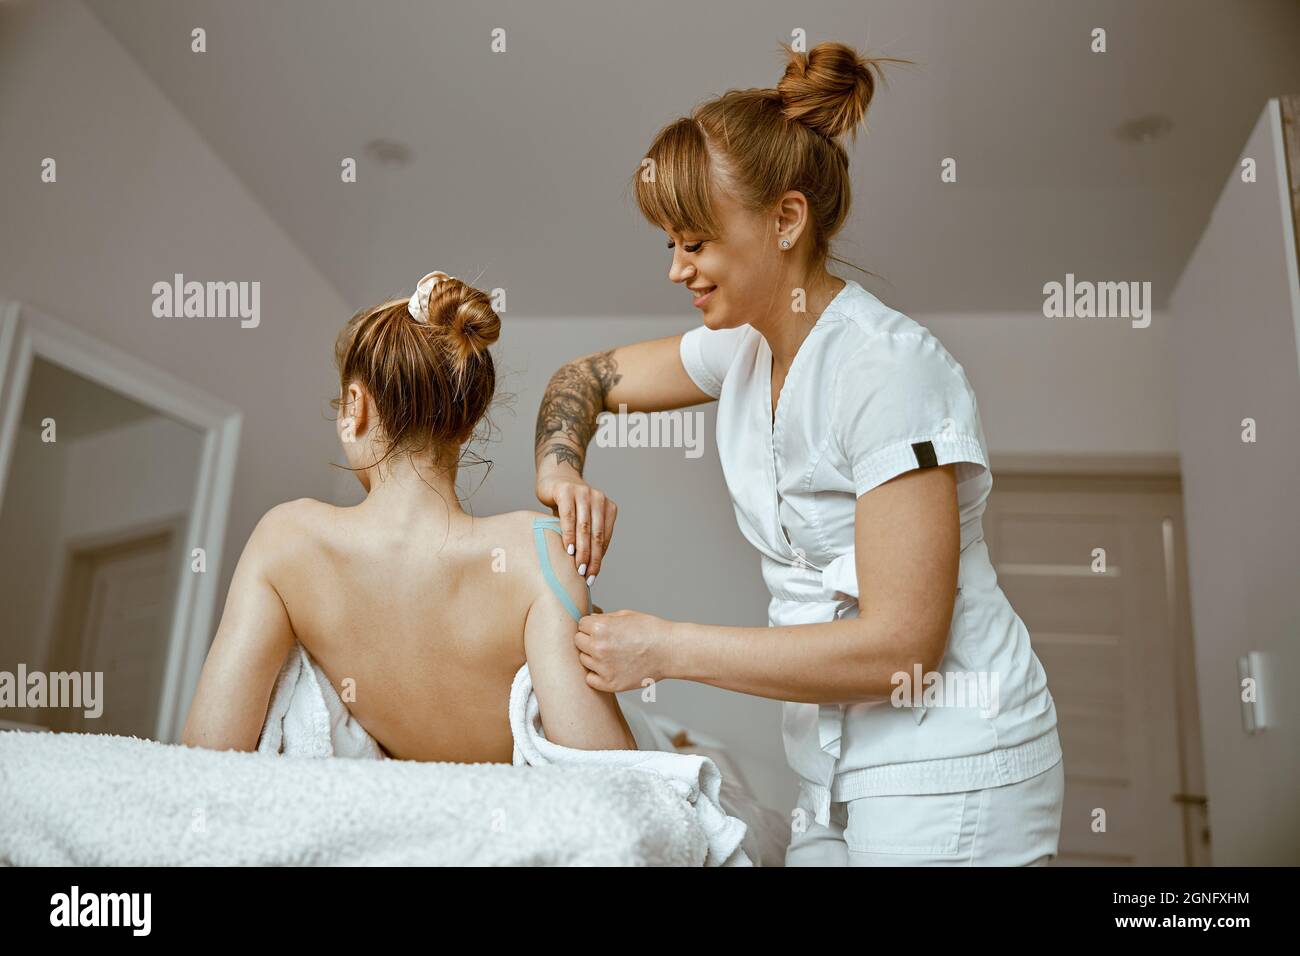 Confident female doctor is doing taping procedure in modenr treatment cabinet Stock Photo